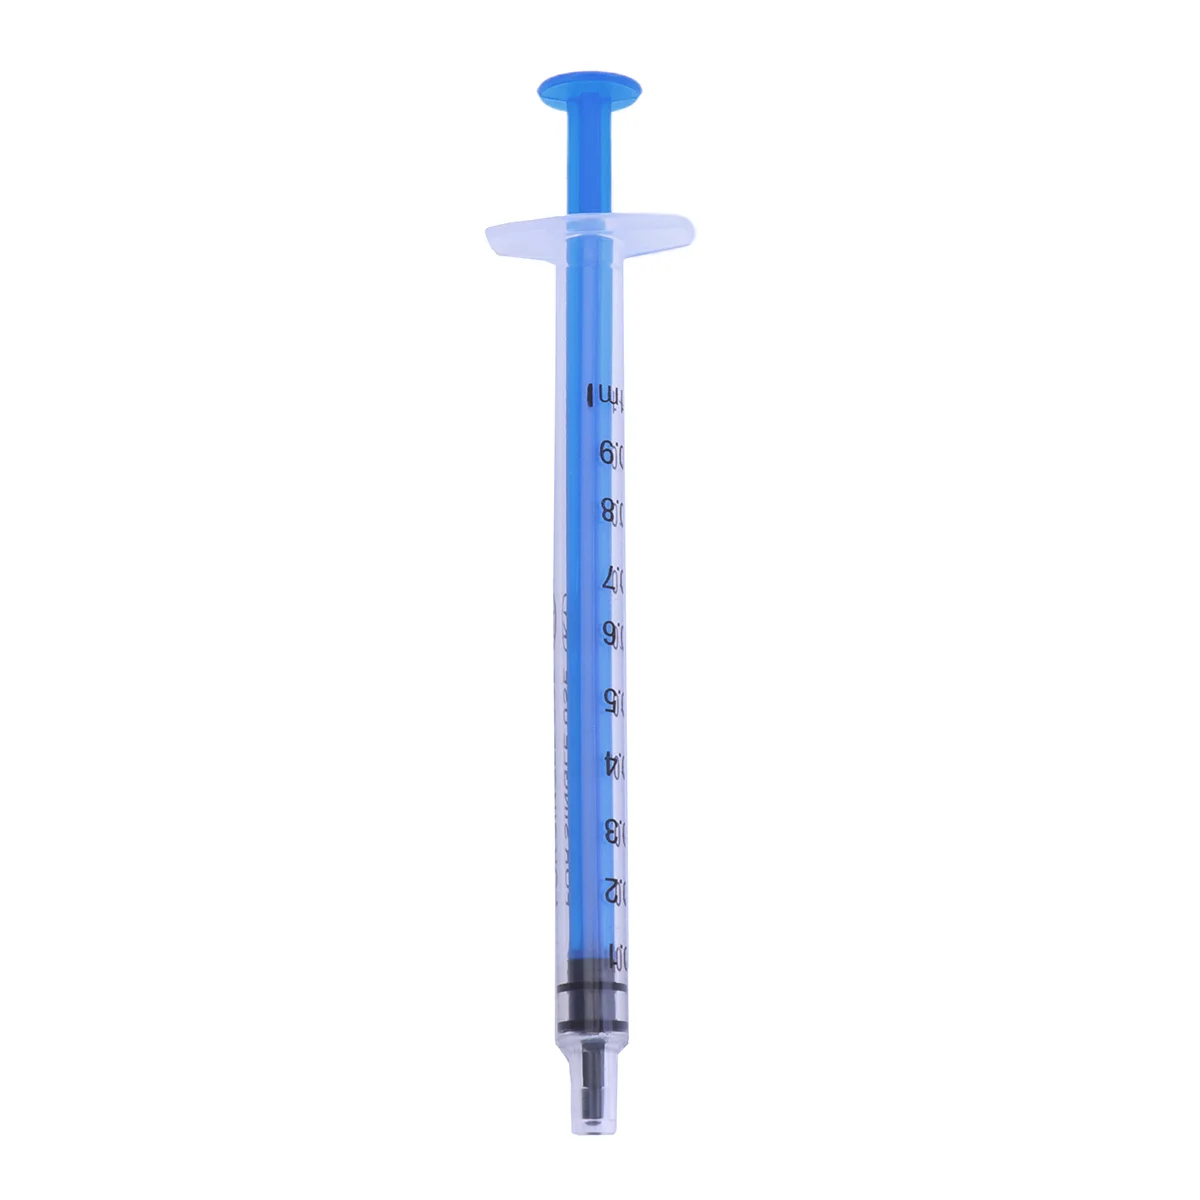 

70pcs 1ml Disposable Syringe Lightweight Injector without Needle for Scientific Labs Dispensing and Multiple Uses